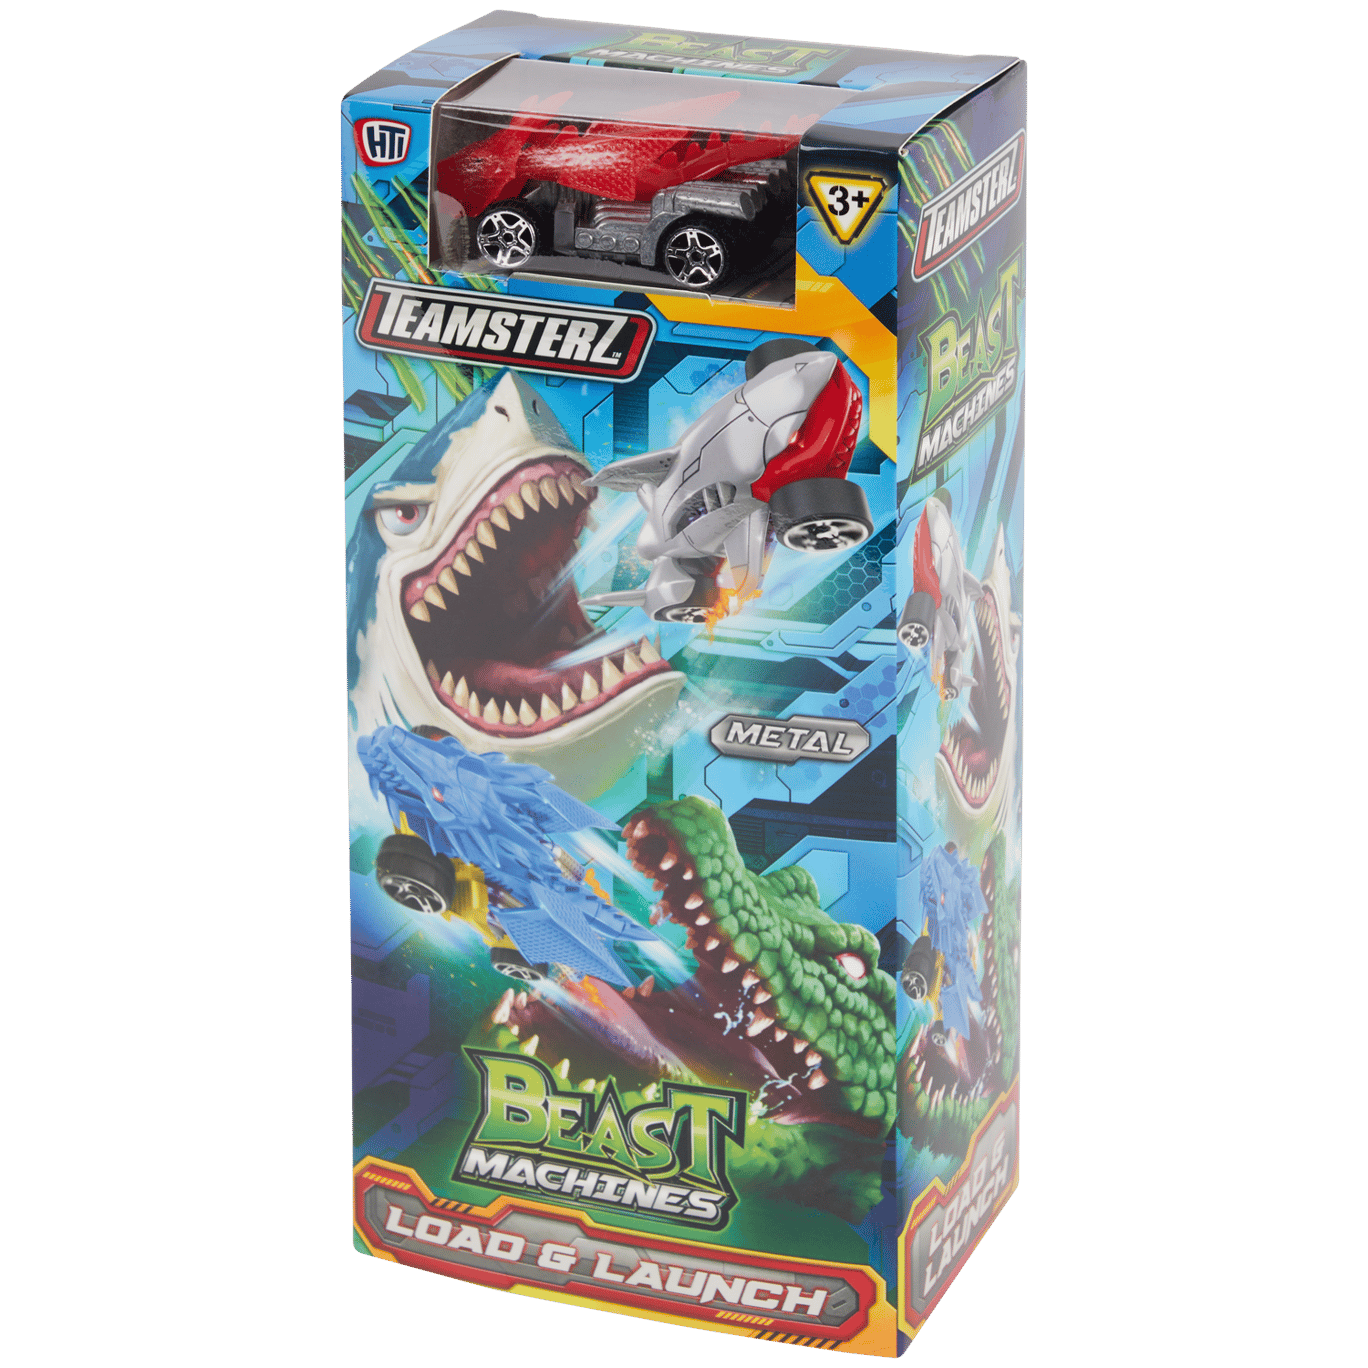 Teamsterz Beast Machines Load & Launch